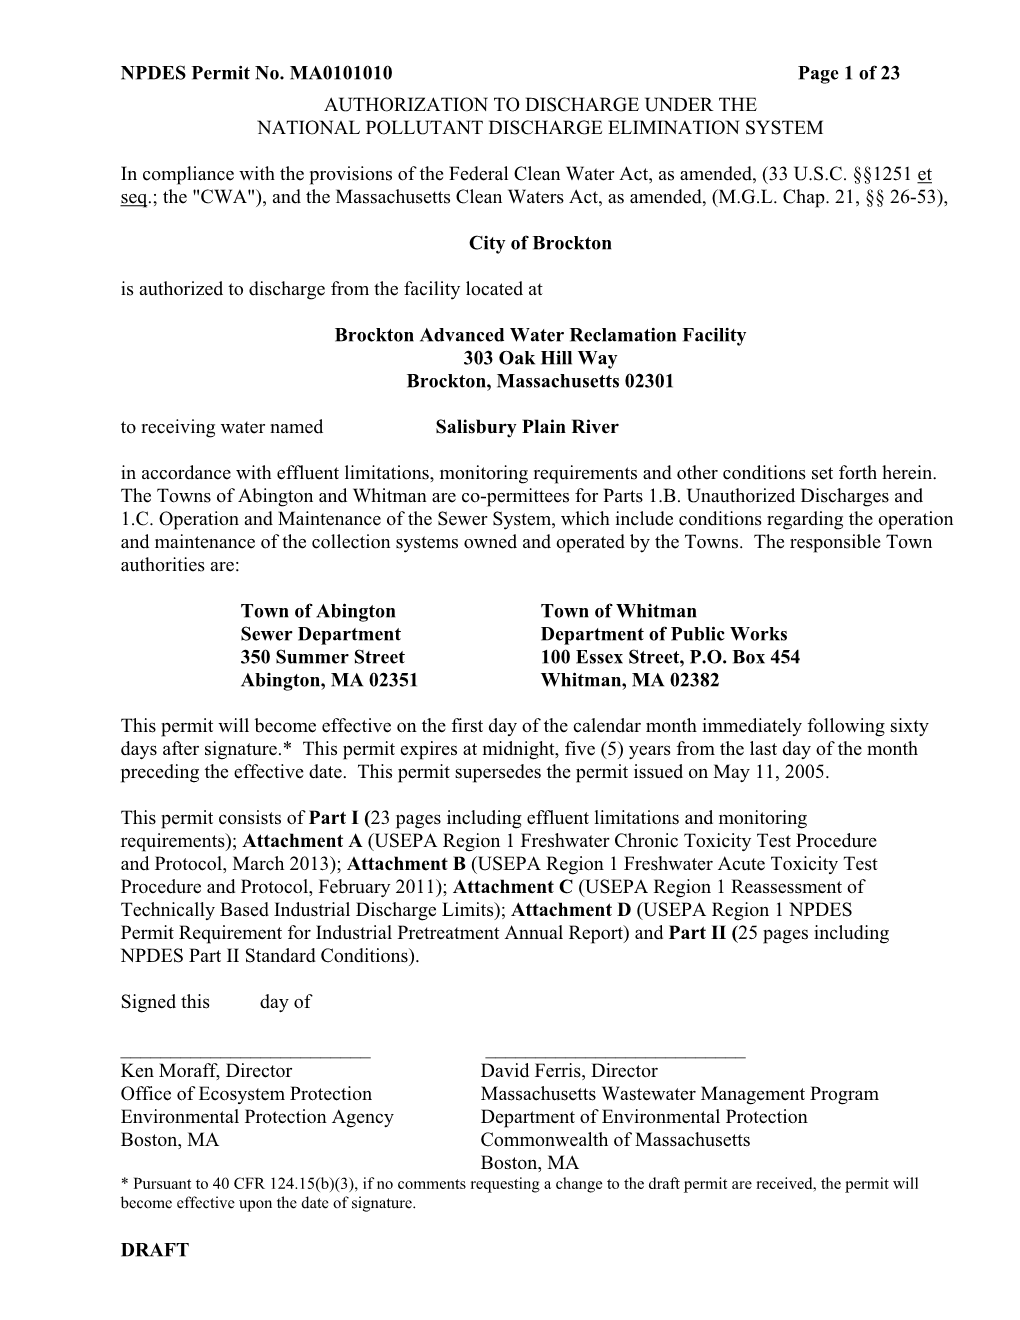 NPDES Permit No. MA0101010 Page 1 of 23 AUTHORIZATION to DISCHARGE UNDER the NATIONAL POLLUTANT DISCHARGE ELIMINATION SYSTEM